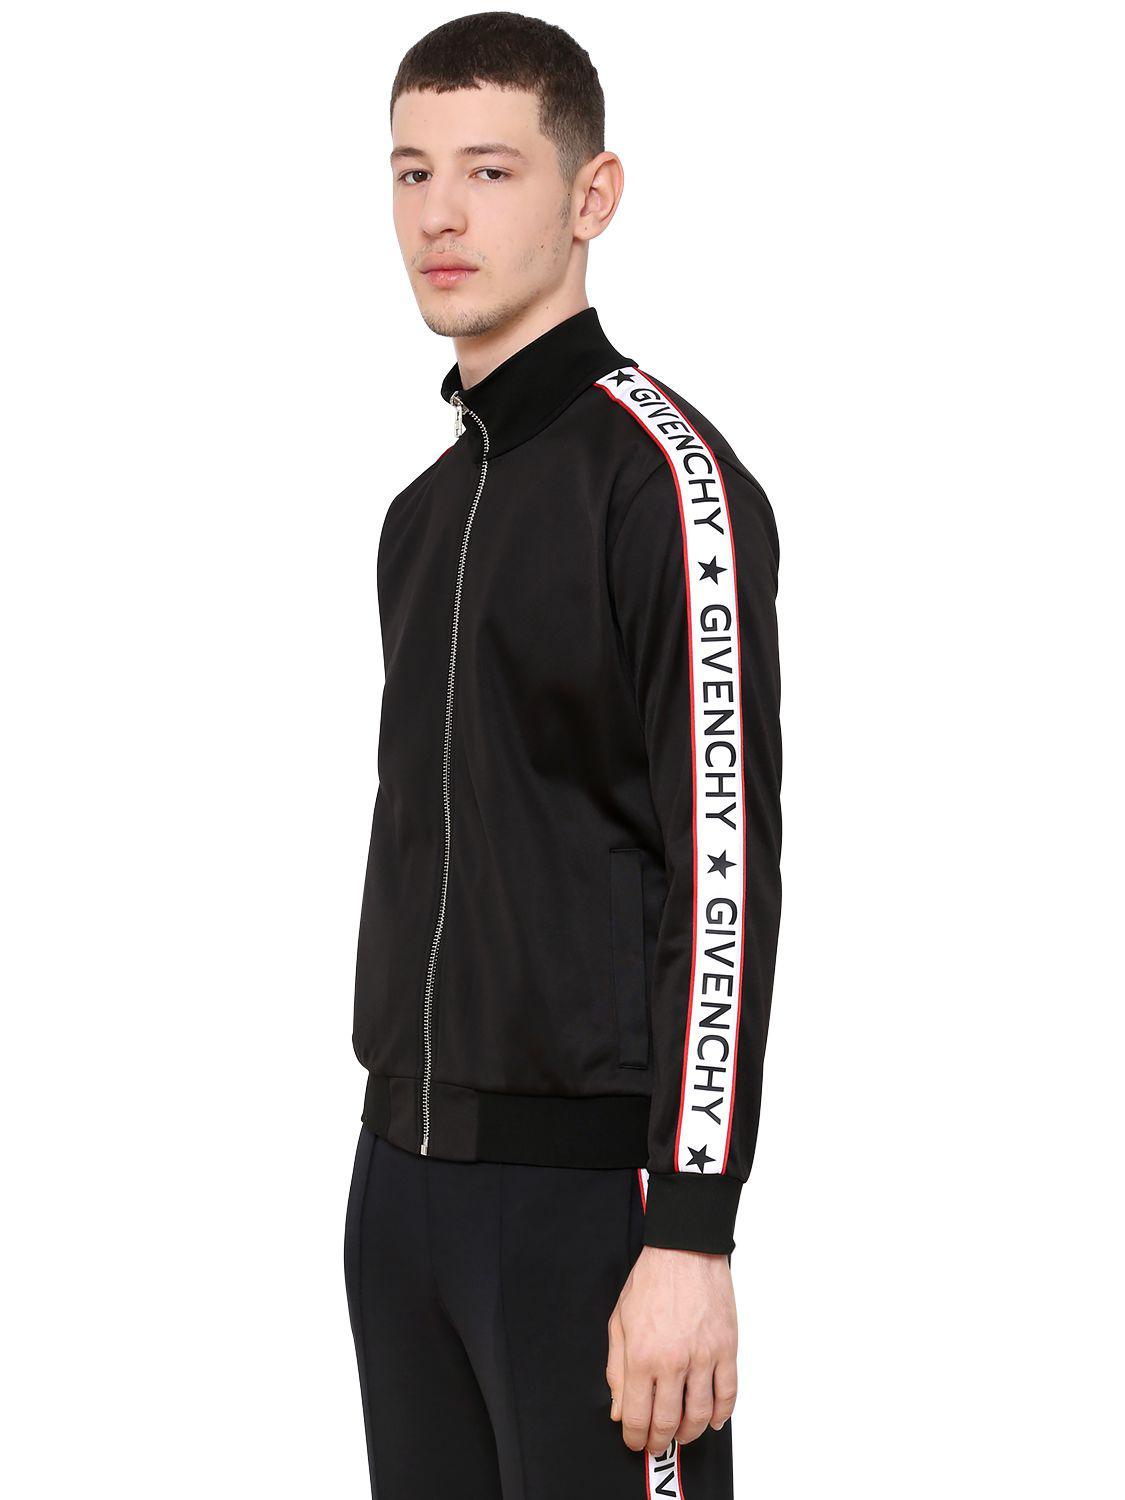 givenchy zip up sweater